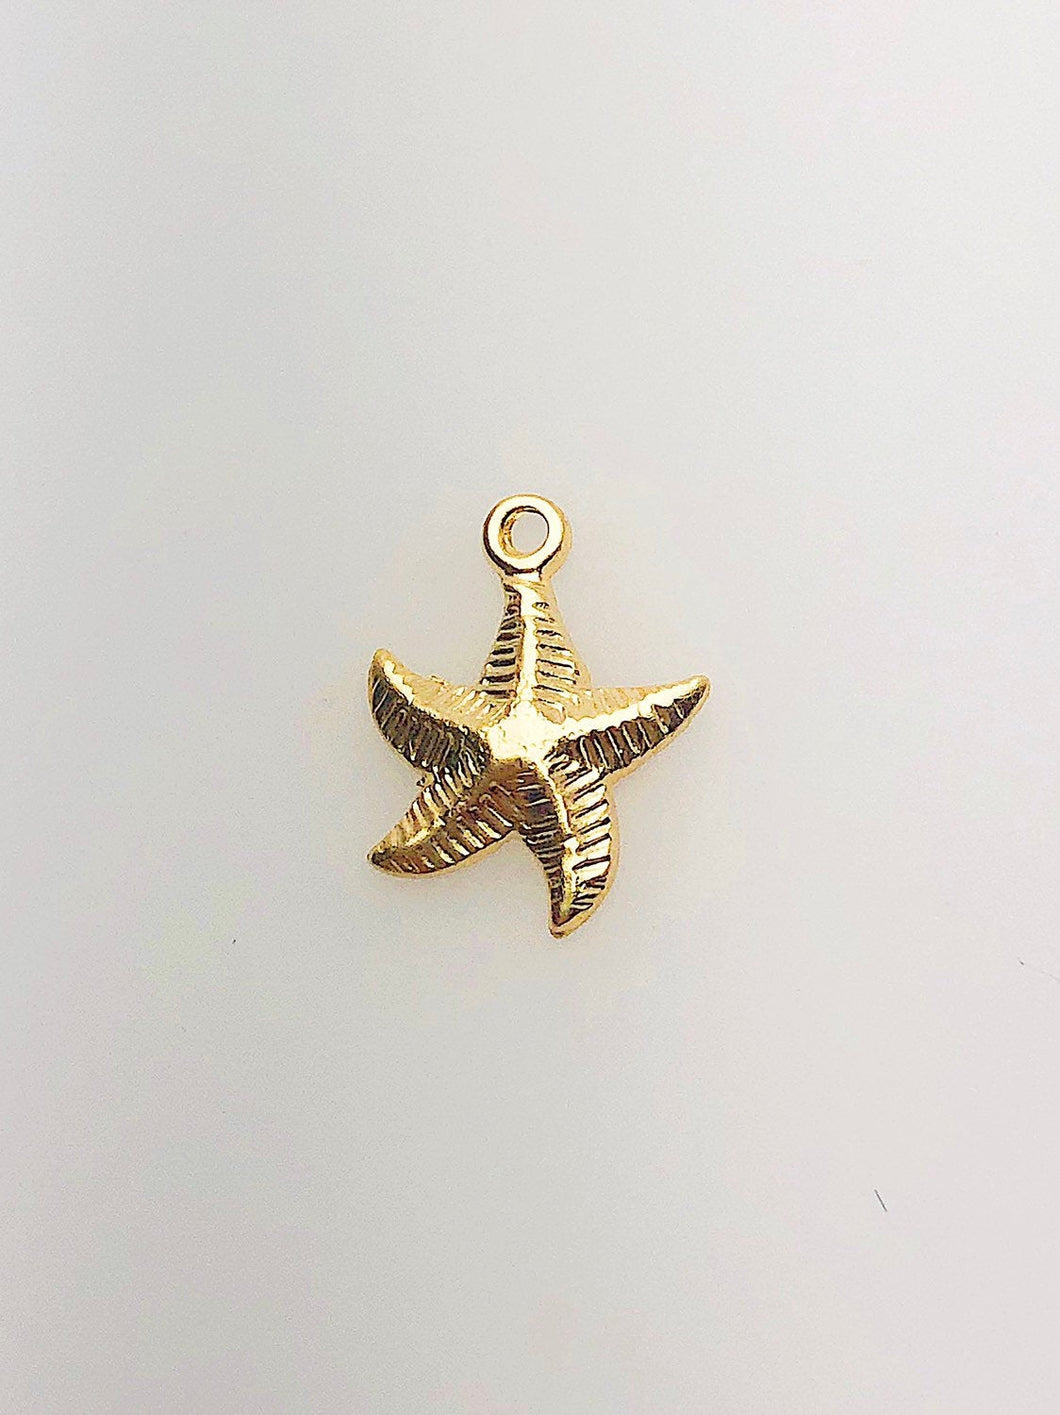 14K Gold Fill Starfish Charm w/ Ring, 10.0mm, Made in USA - 788